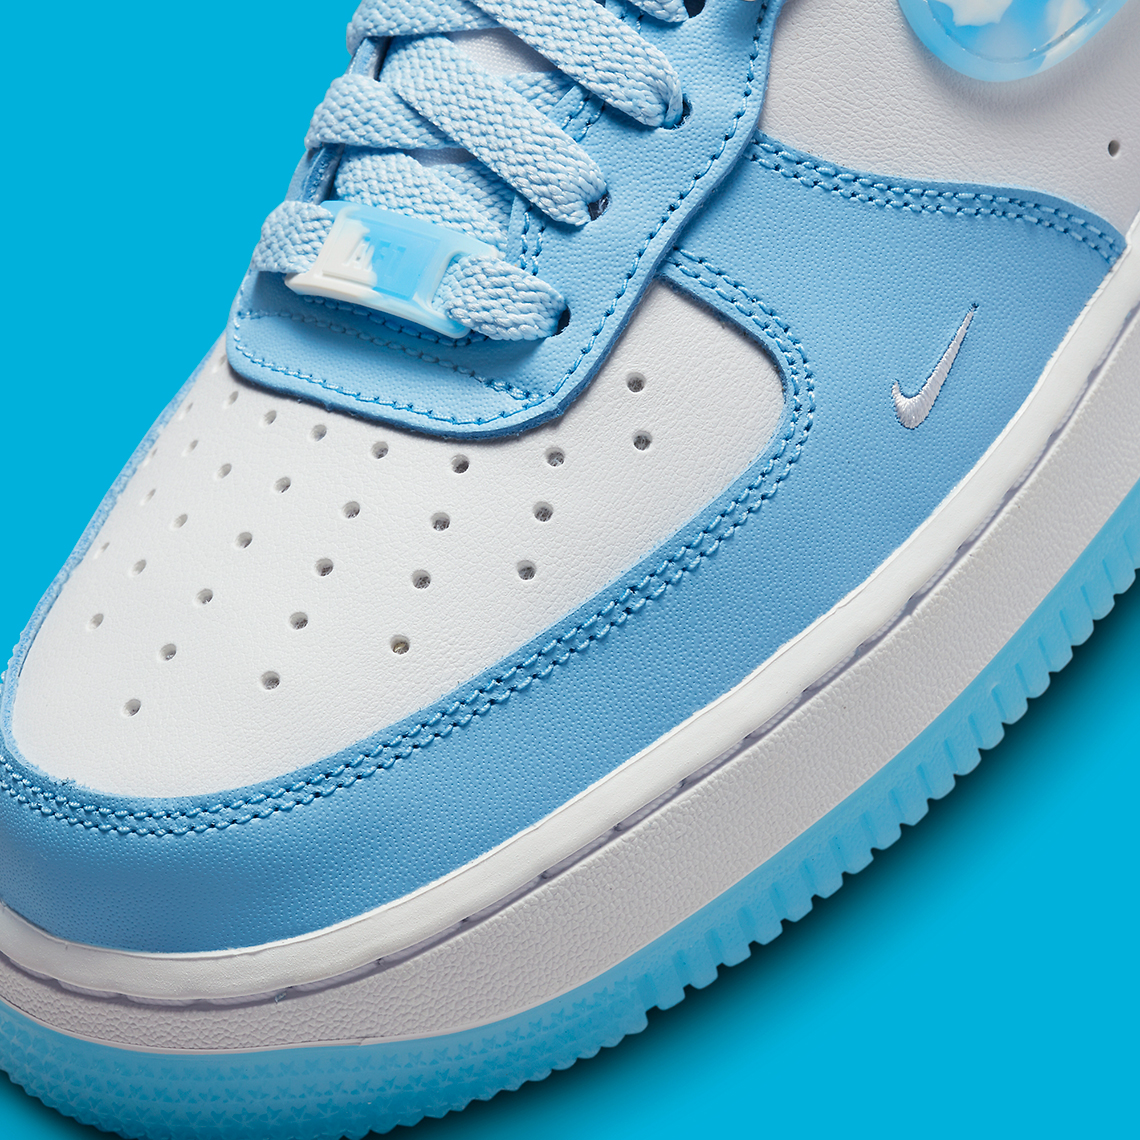 Spray Painted Nike Swooshes Dress This Air Force 1 Low - Sneaker News